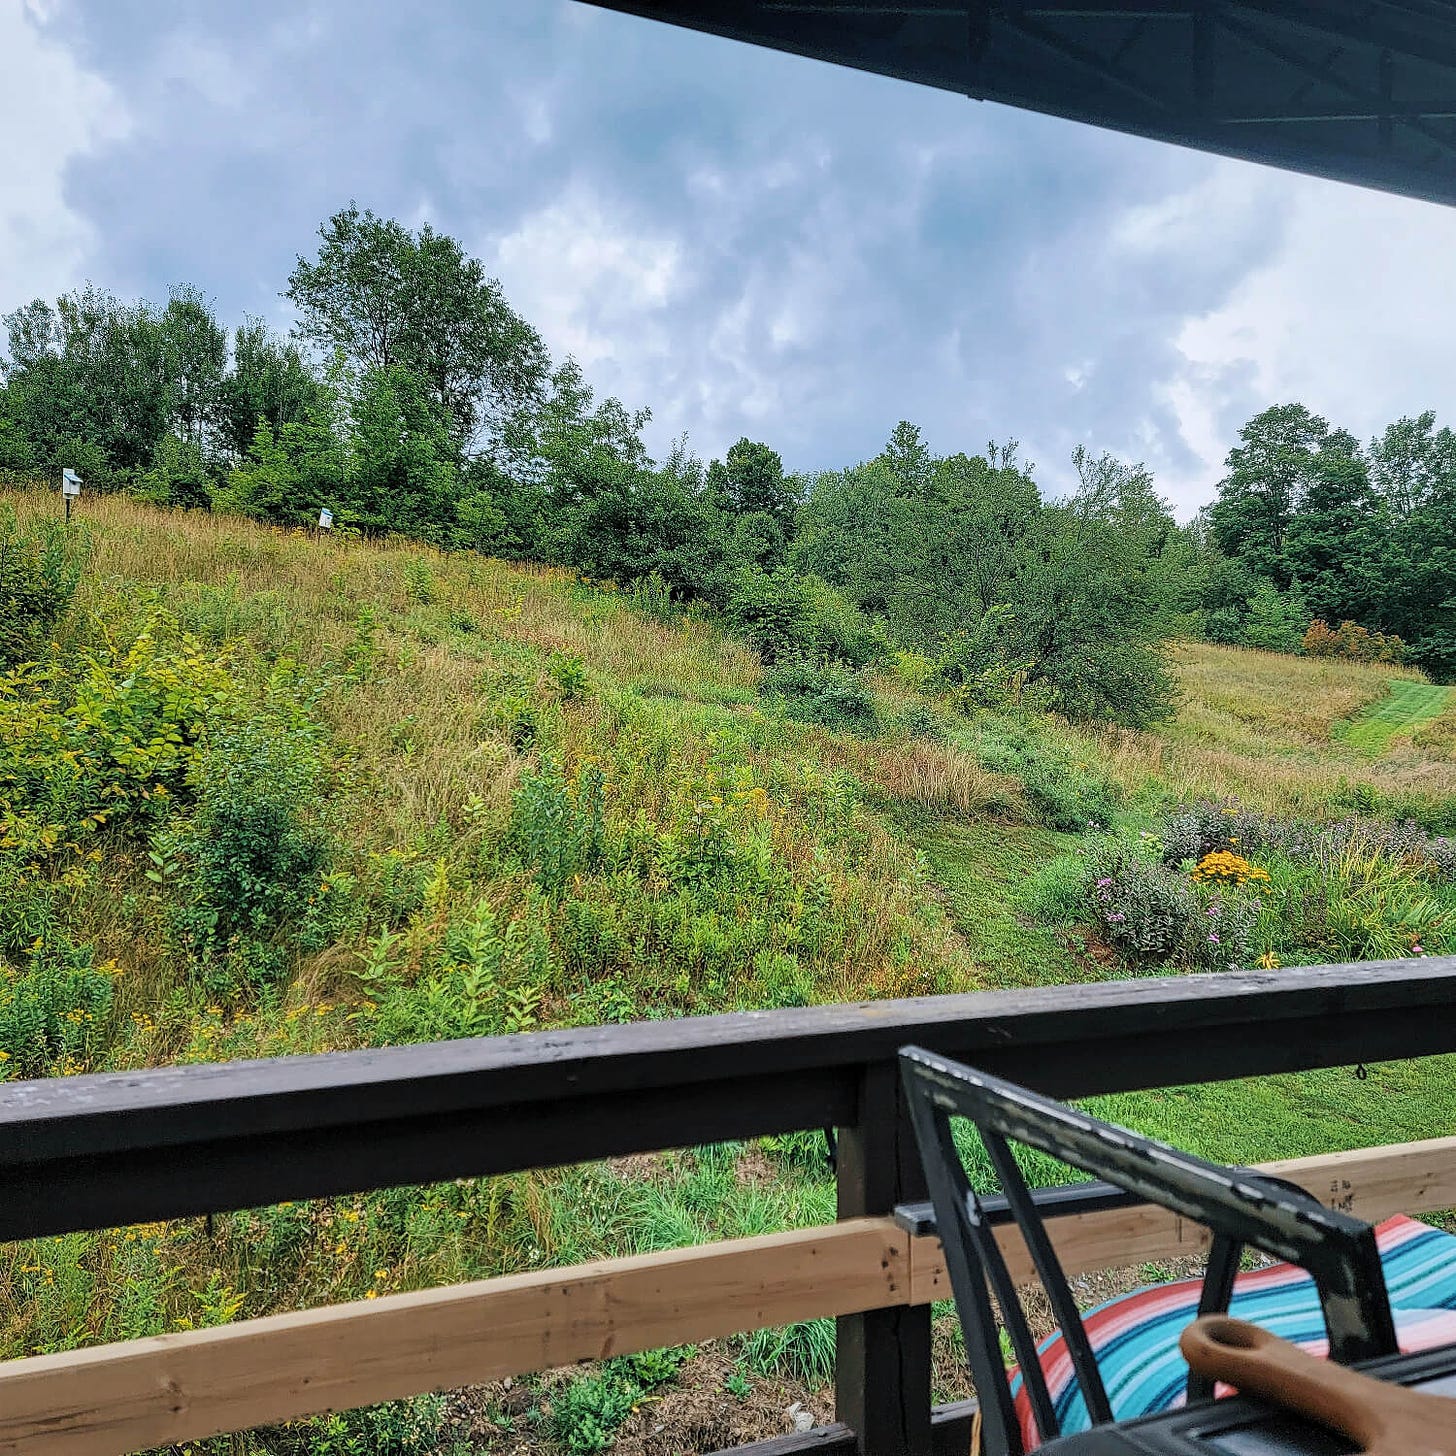 a biodiverse, green hillside filled with tons of plants and towering trees amid a cloudy grey sky. photo taken from beneath a gazebo on a deck, with a corner of the table and chair peeking into the frame.